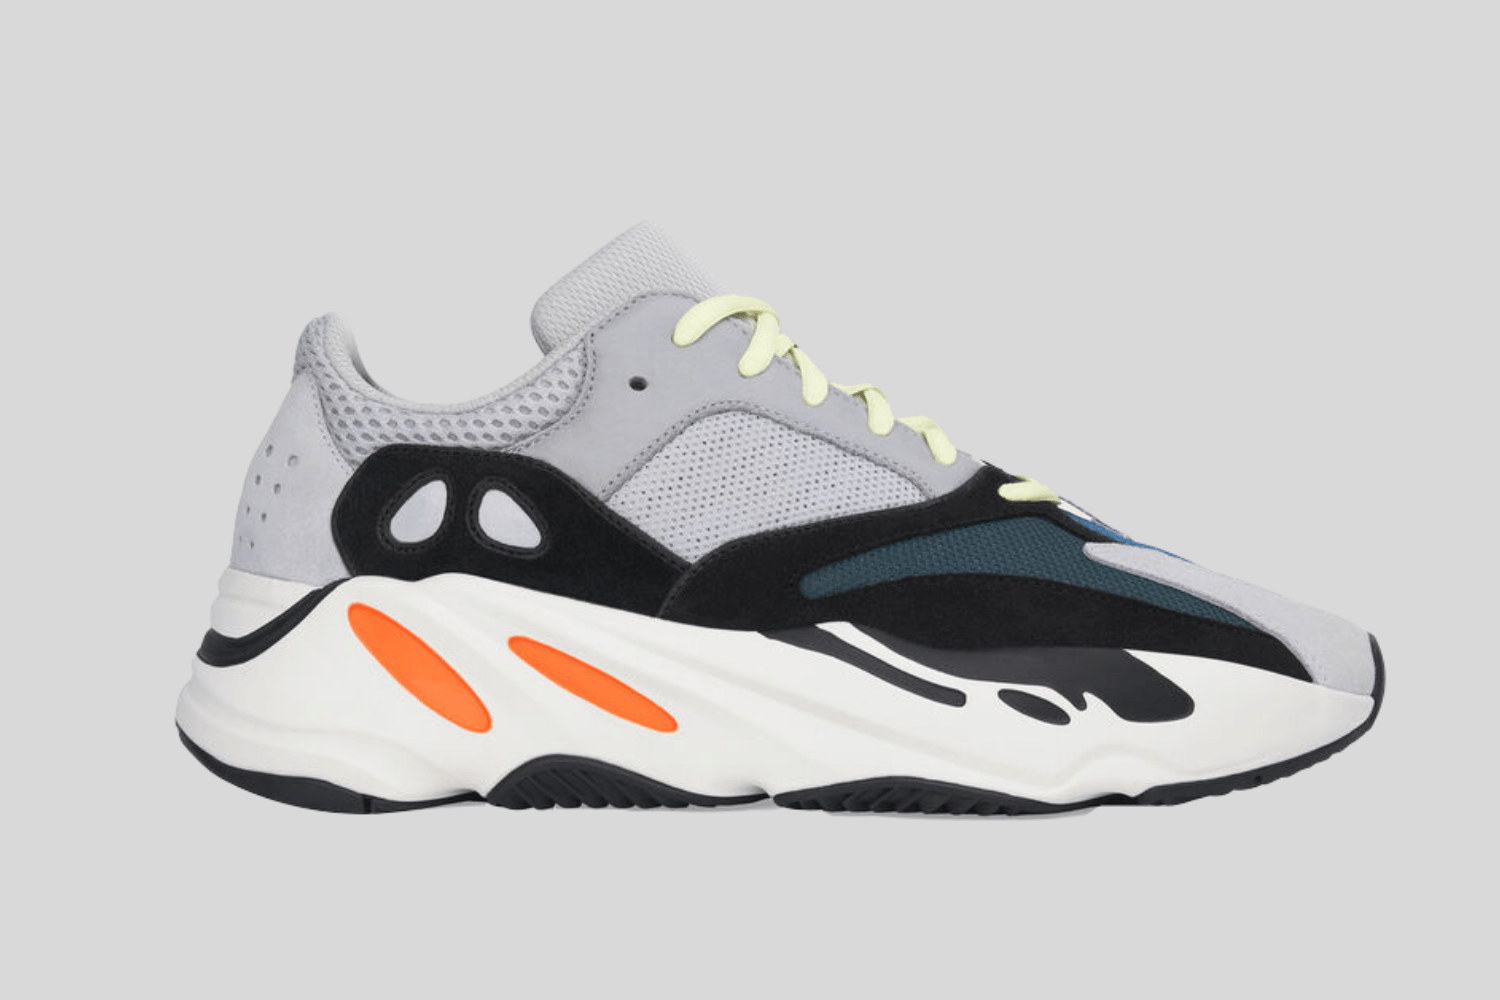 The Yeezy Boost 700 'Wave Runner' gets a restock